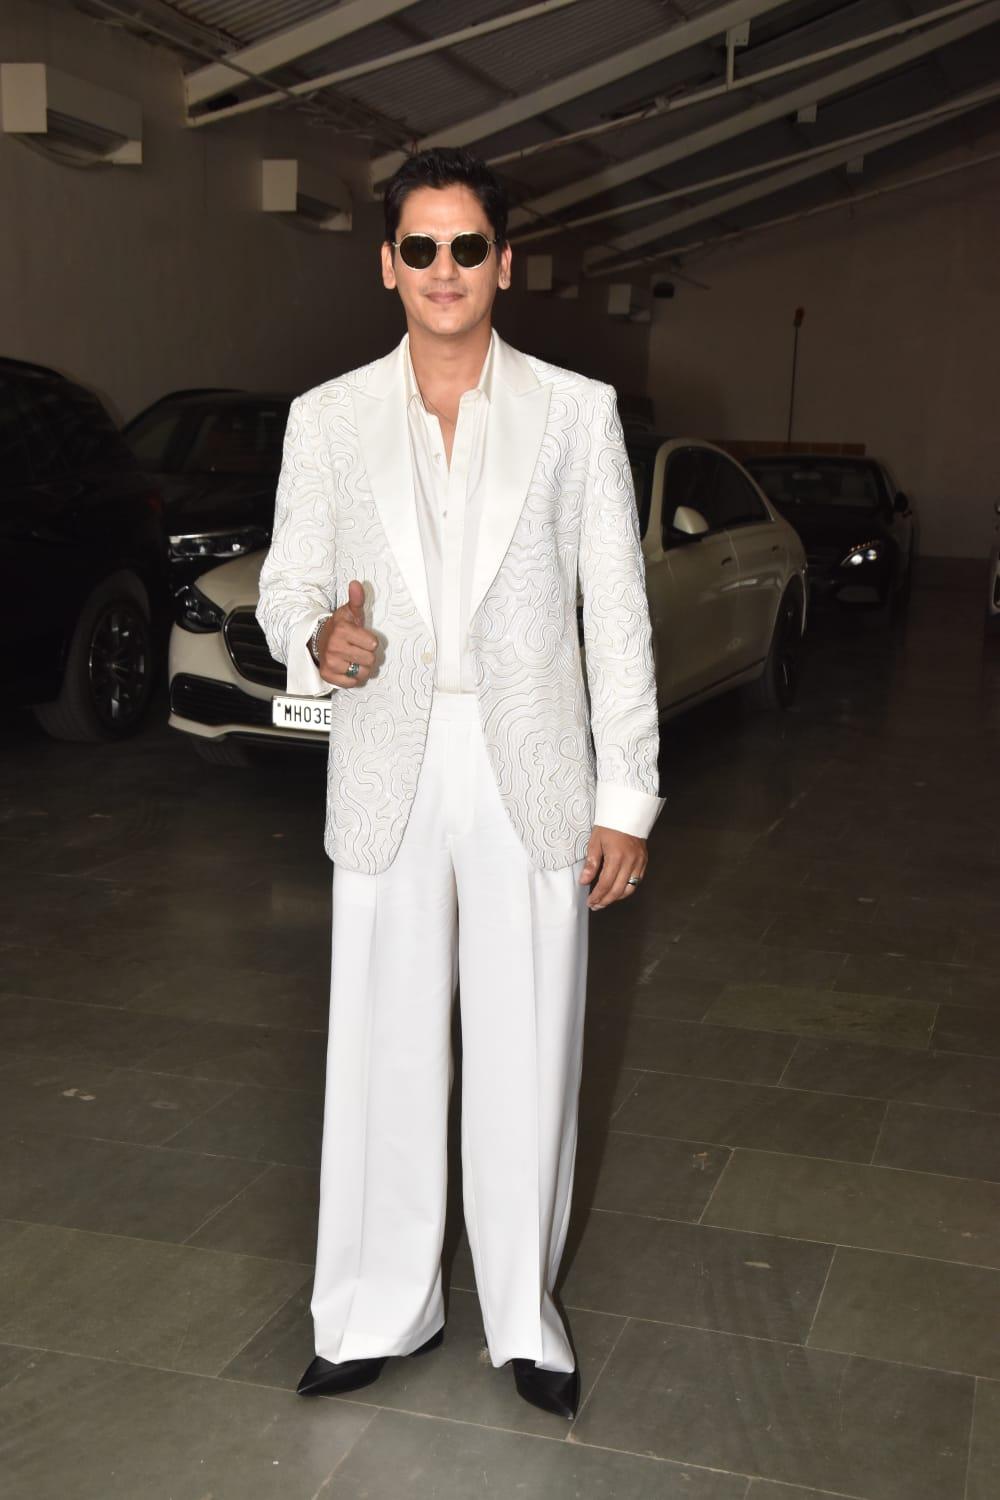 Vijay Varma, another versatile actor, opted for a classic white suit, perfectly balancing sophistication and style.